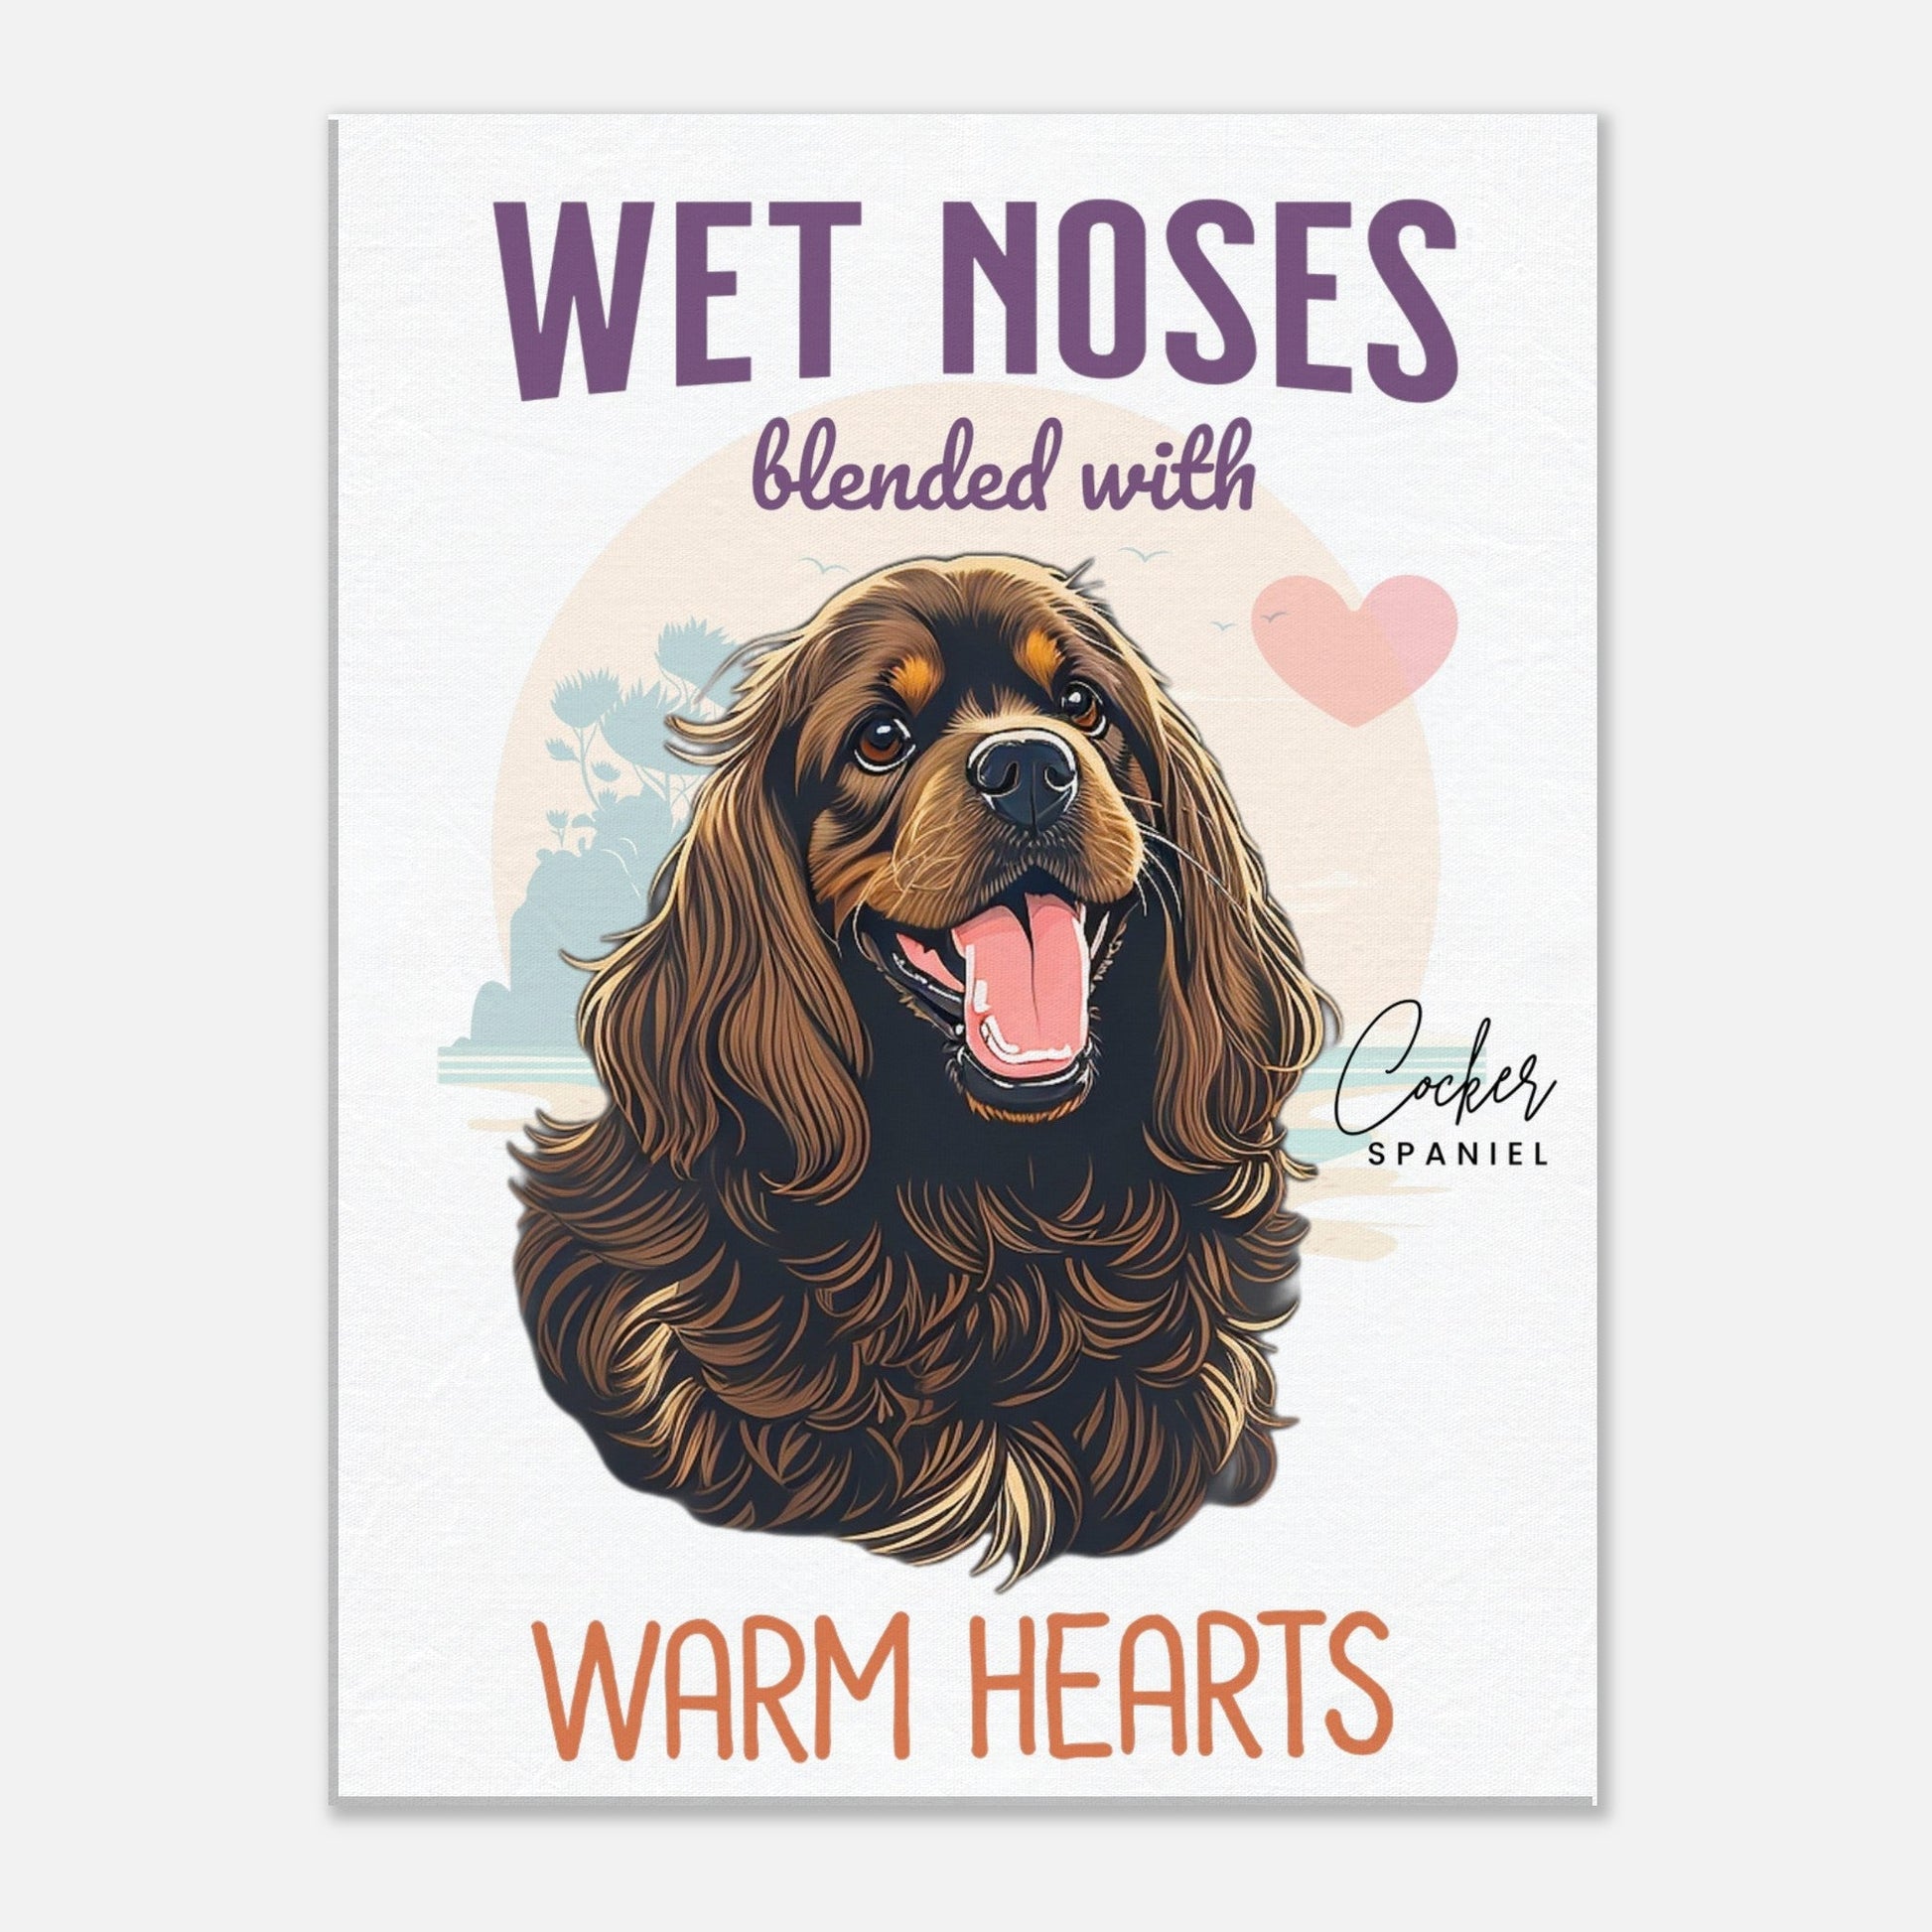 Cocker Spaniel Gift Canvas59.99-(FREE Delivery) Shop now at itsaboutmydog.com, cocker spaniel charm, Cocker Spaniel dad, cocker spaniel decor, Cocker Spaniel gift, cocker spaniel gifts, Cocker Spaniel lover, cocker spaniel momma, Cocker Spaniel Print, dog canvas, english cocker spaniel